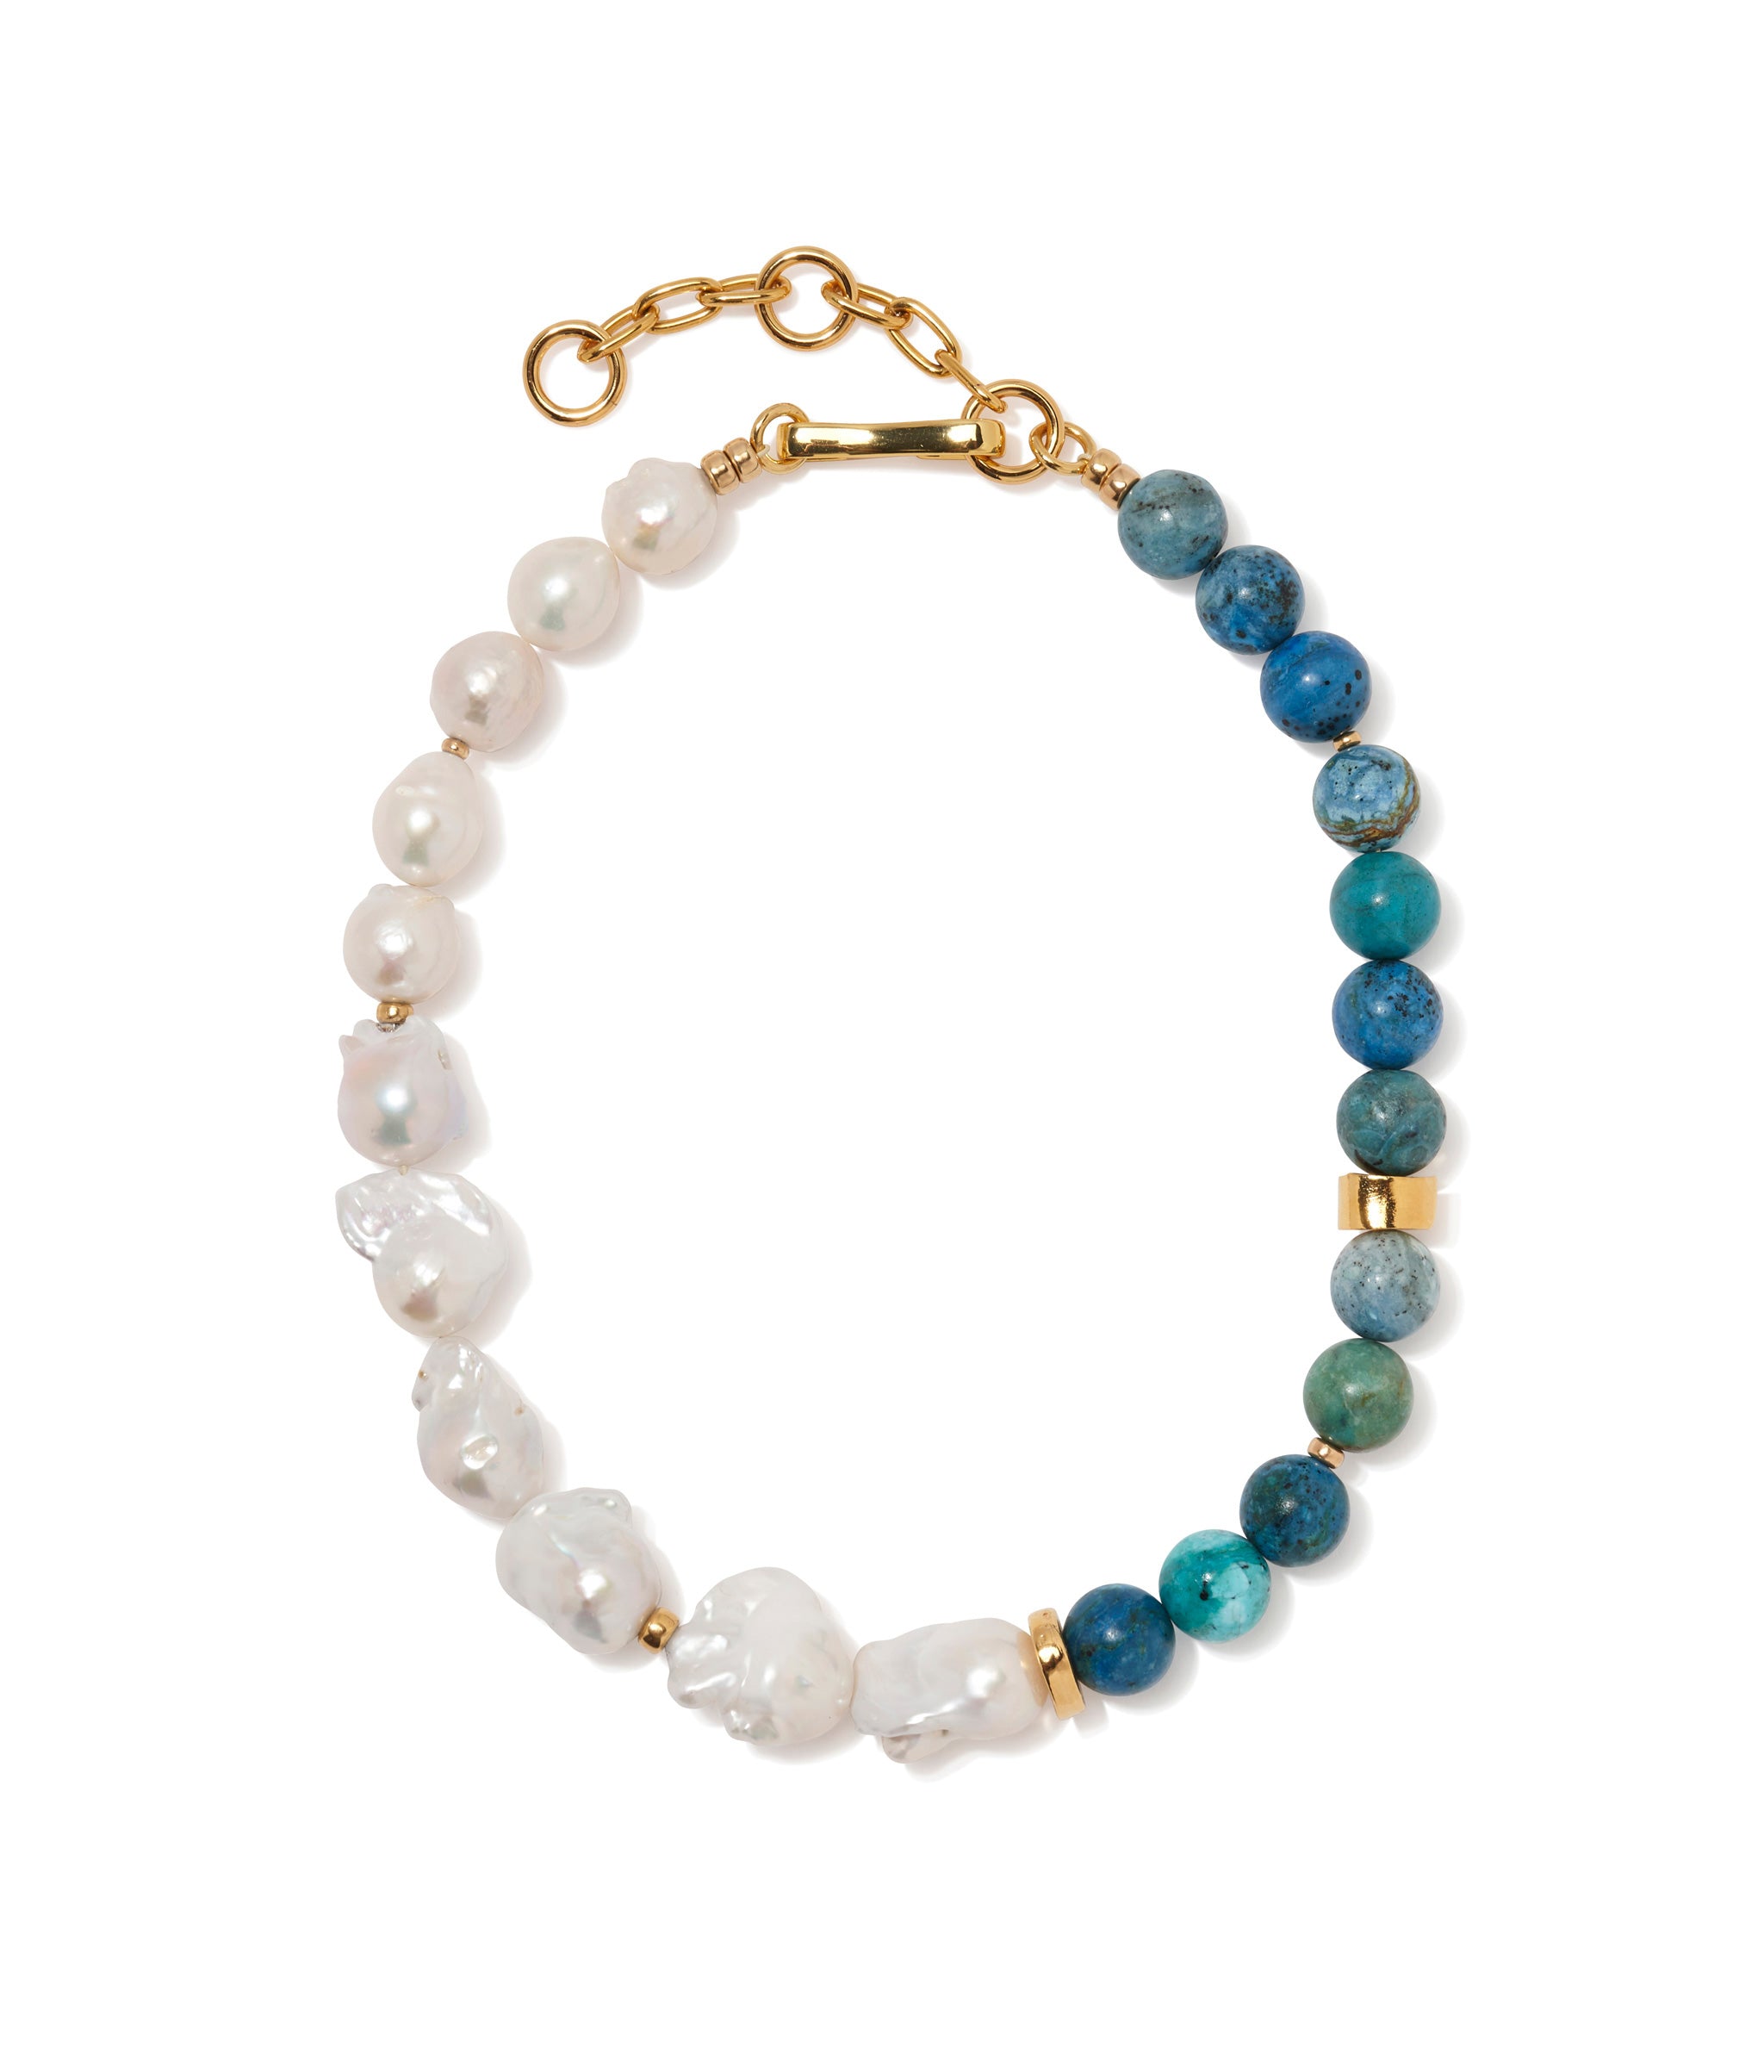 Formentera Necklace. Chrysocolla and freshwater pearl beads with gold-plated brass details and closure.